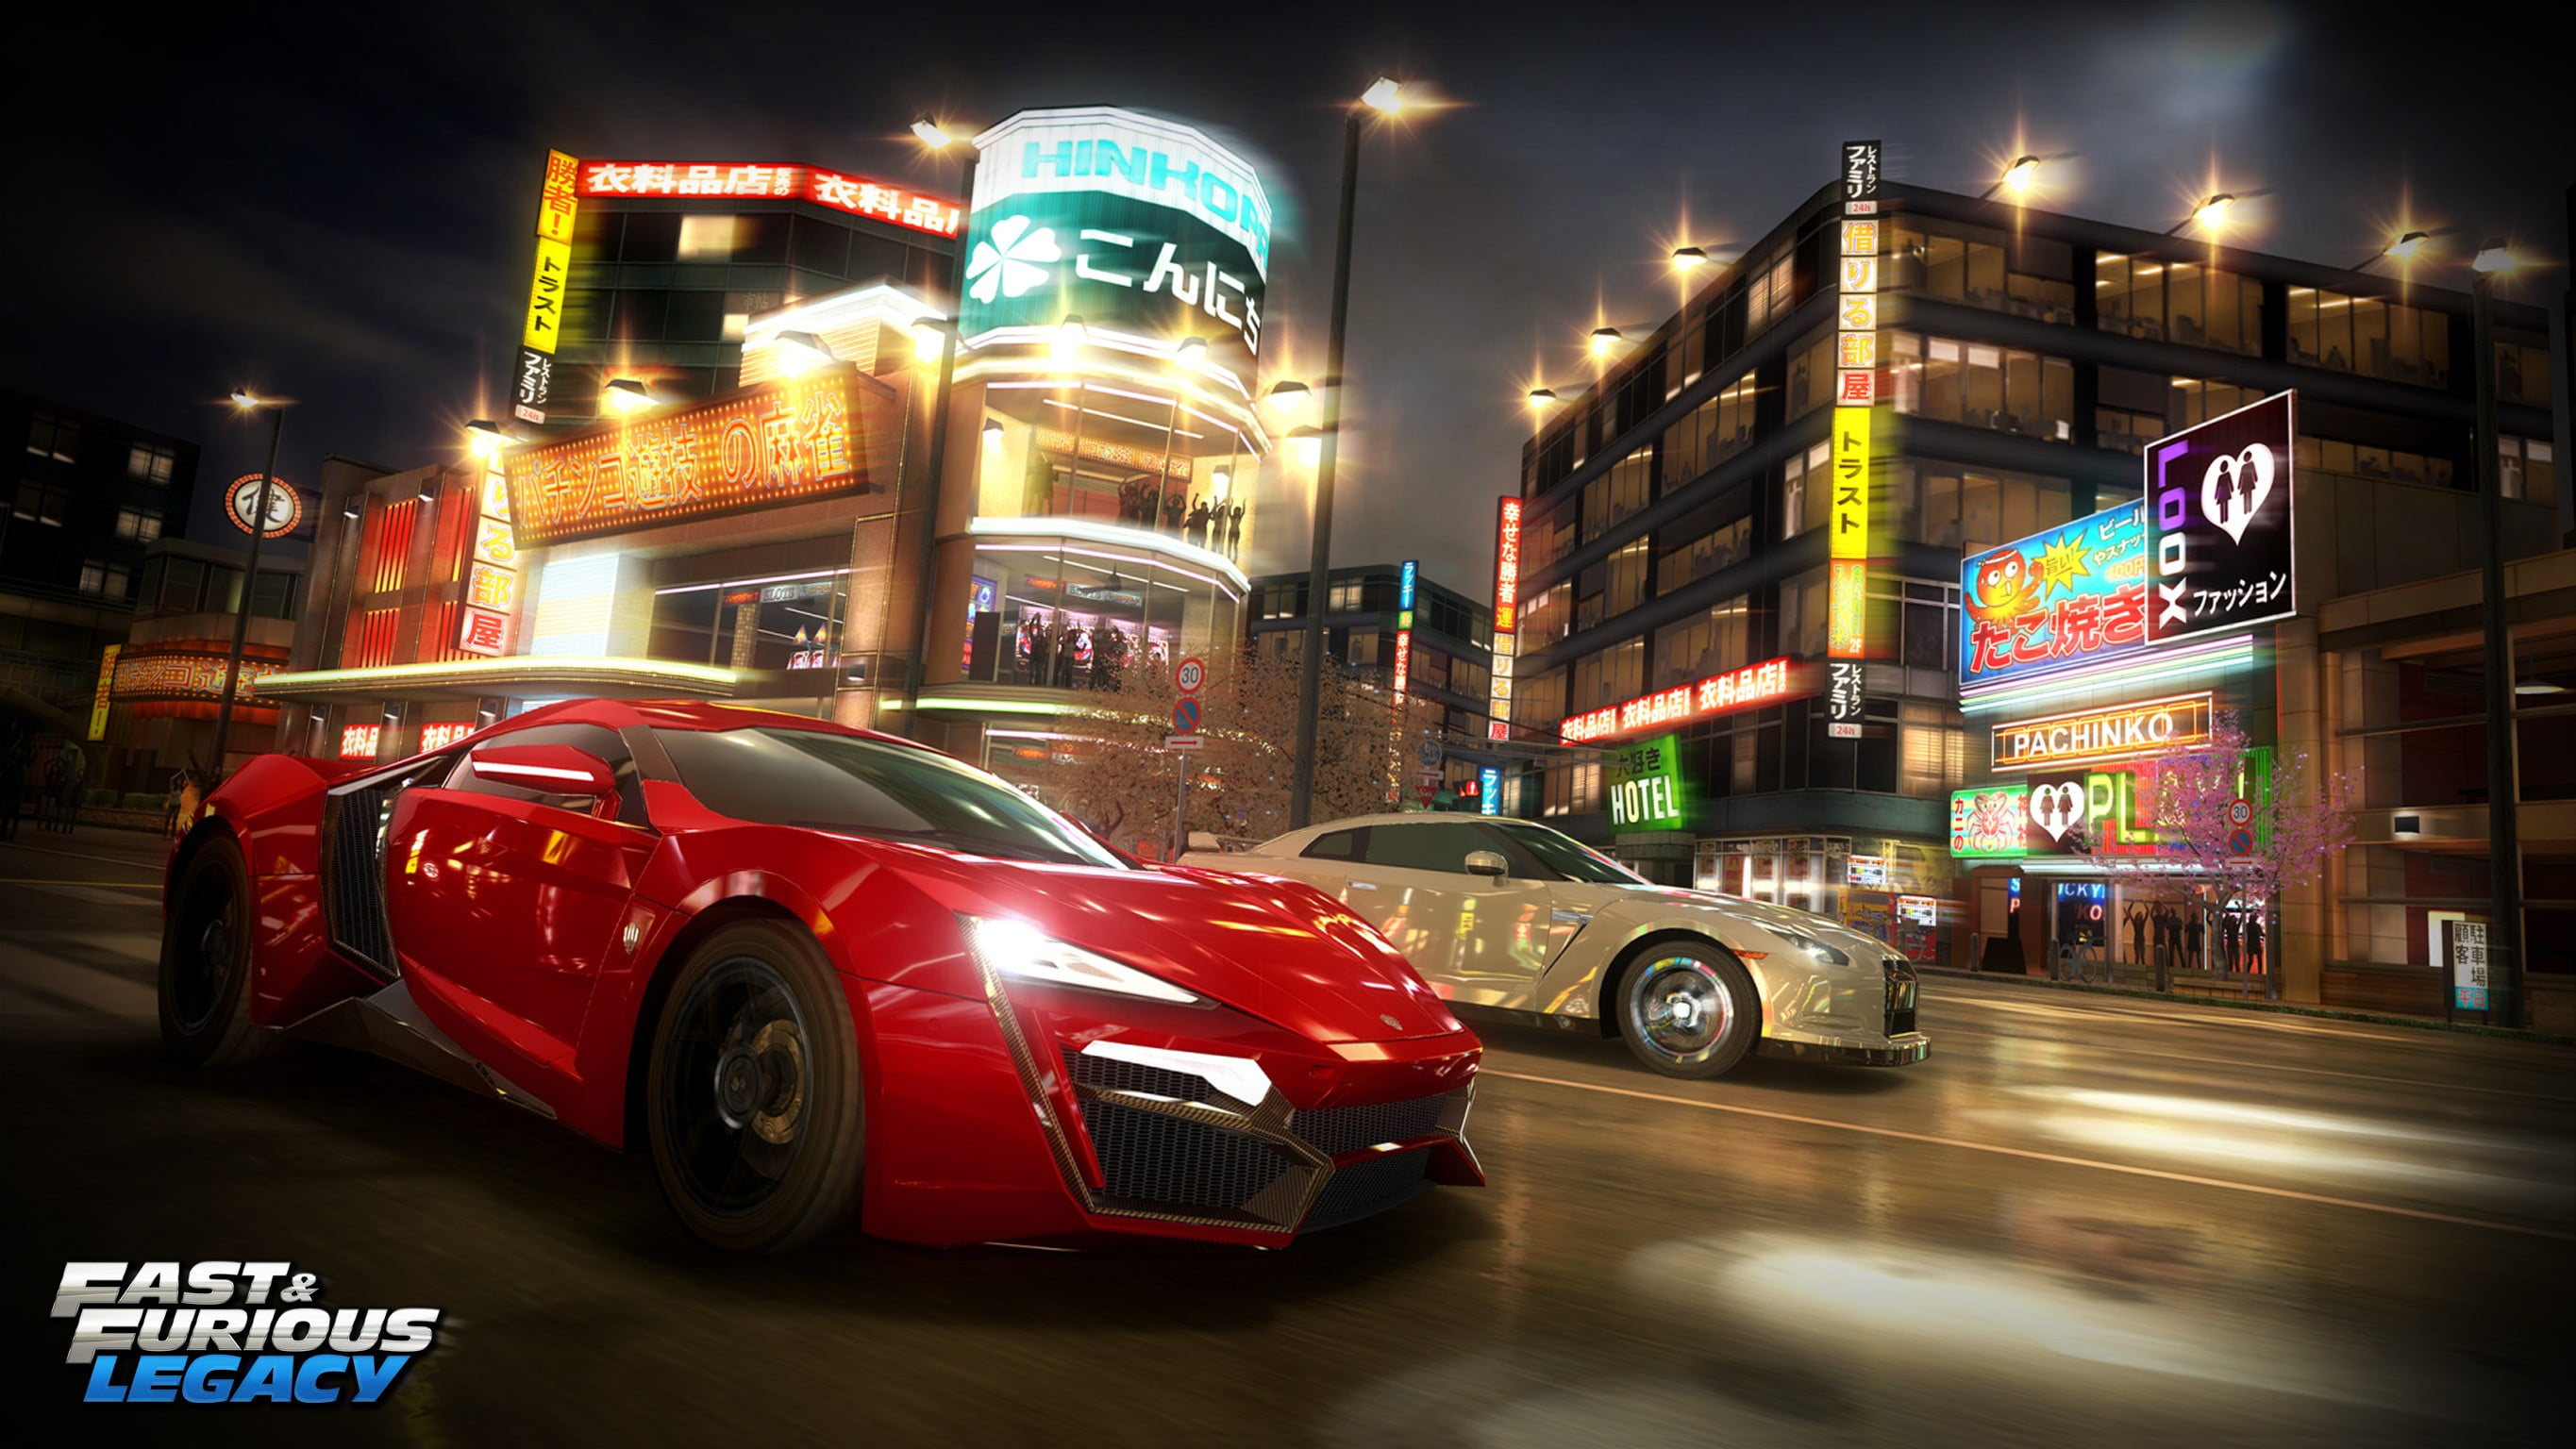 red sport car, Fast and Furious, Fast & Furious: Legacy, video games